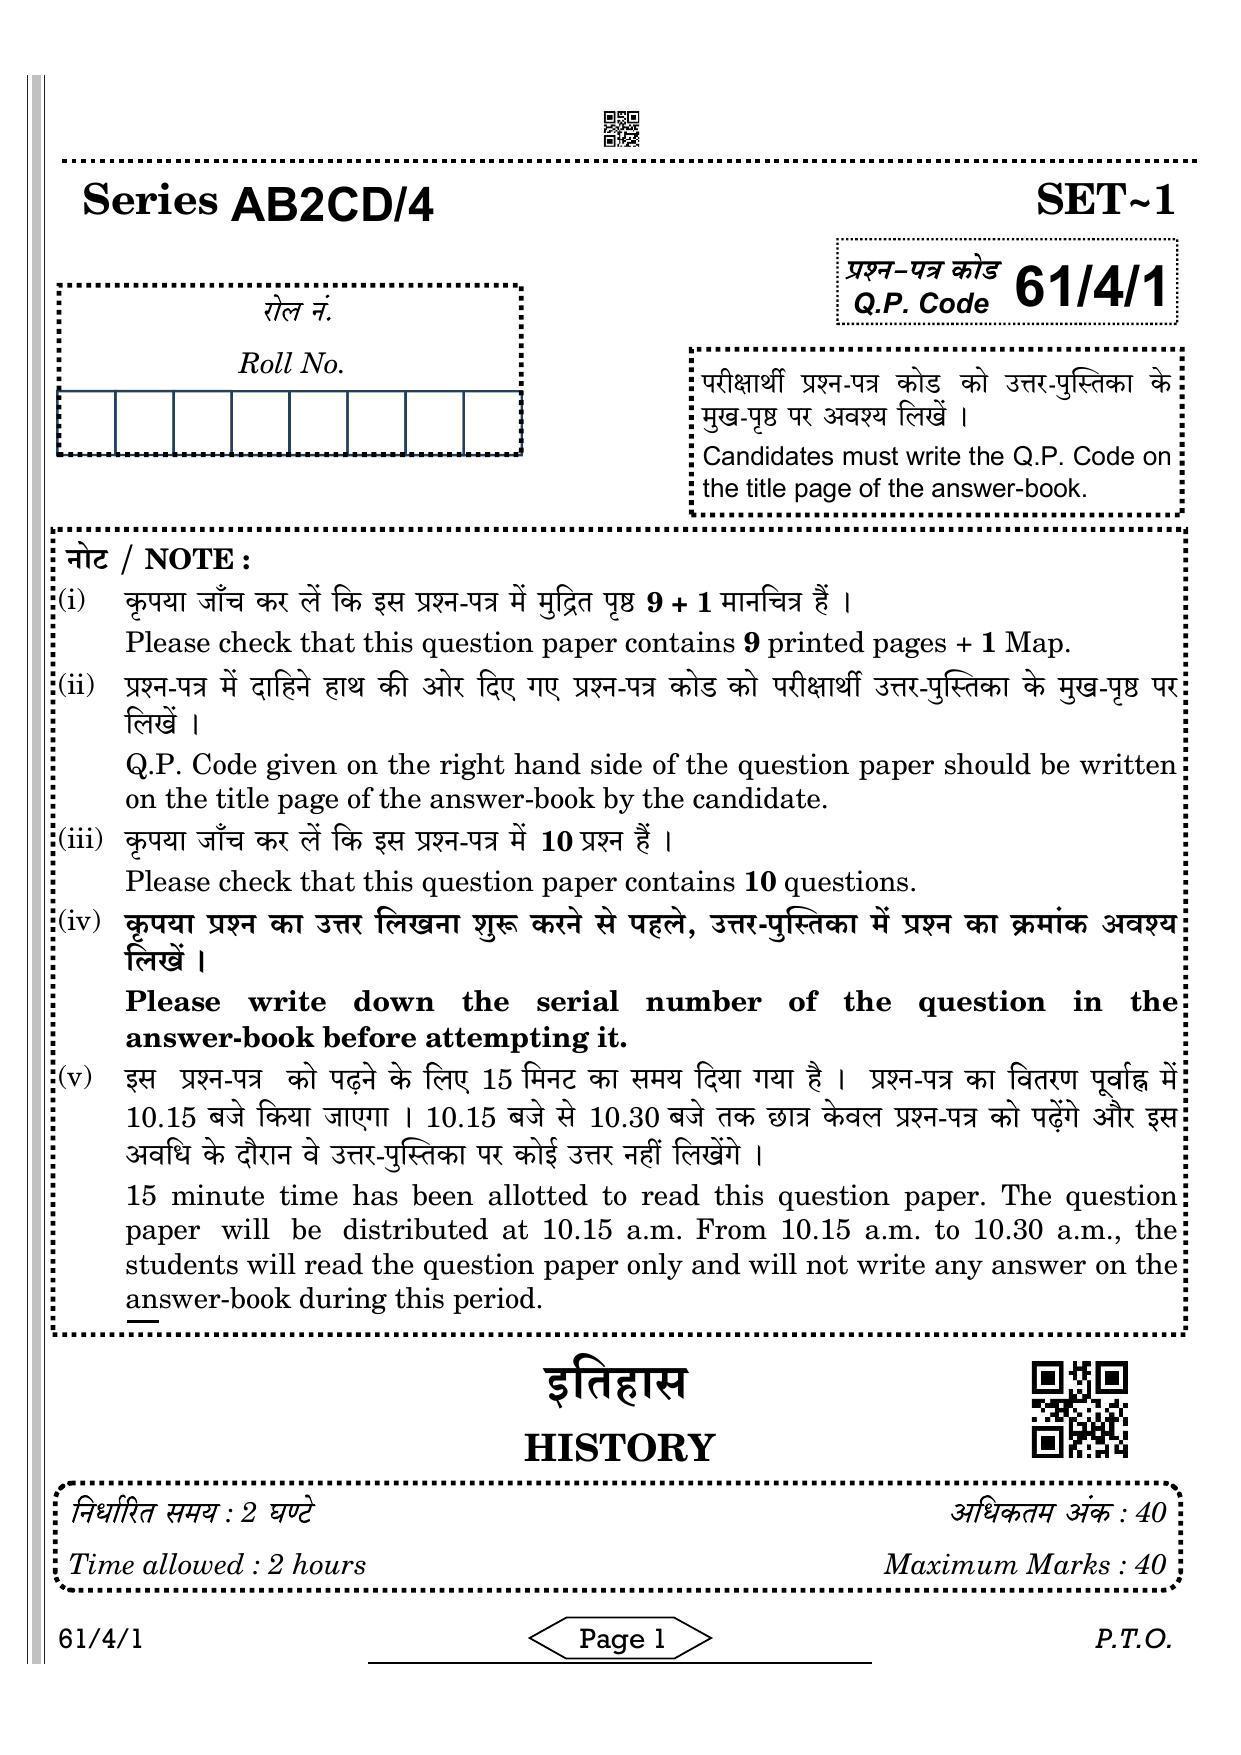 CBSE Class 12 61-4-1 History 2022 Question Paper - Page 1